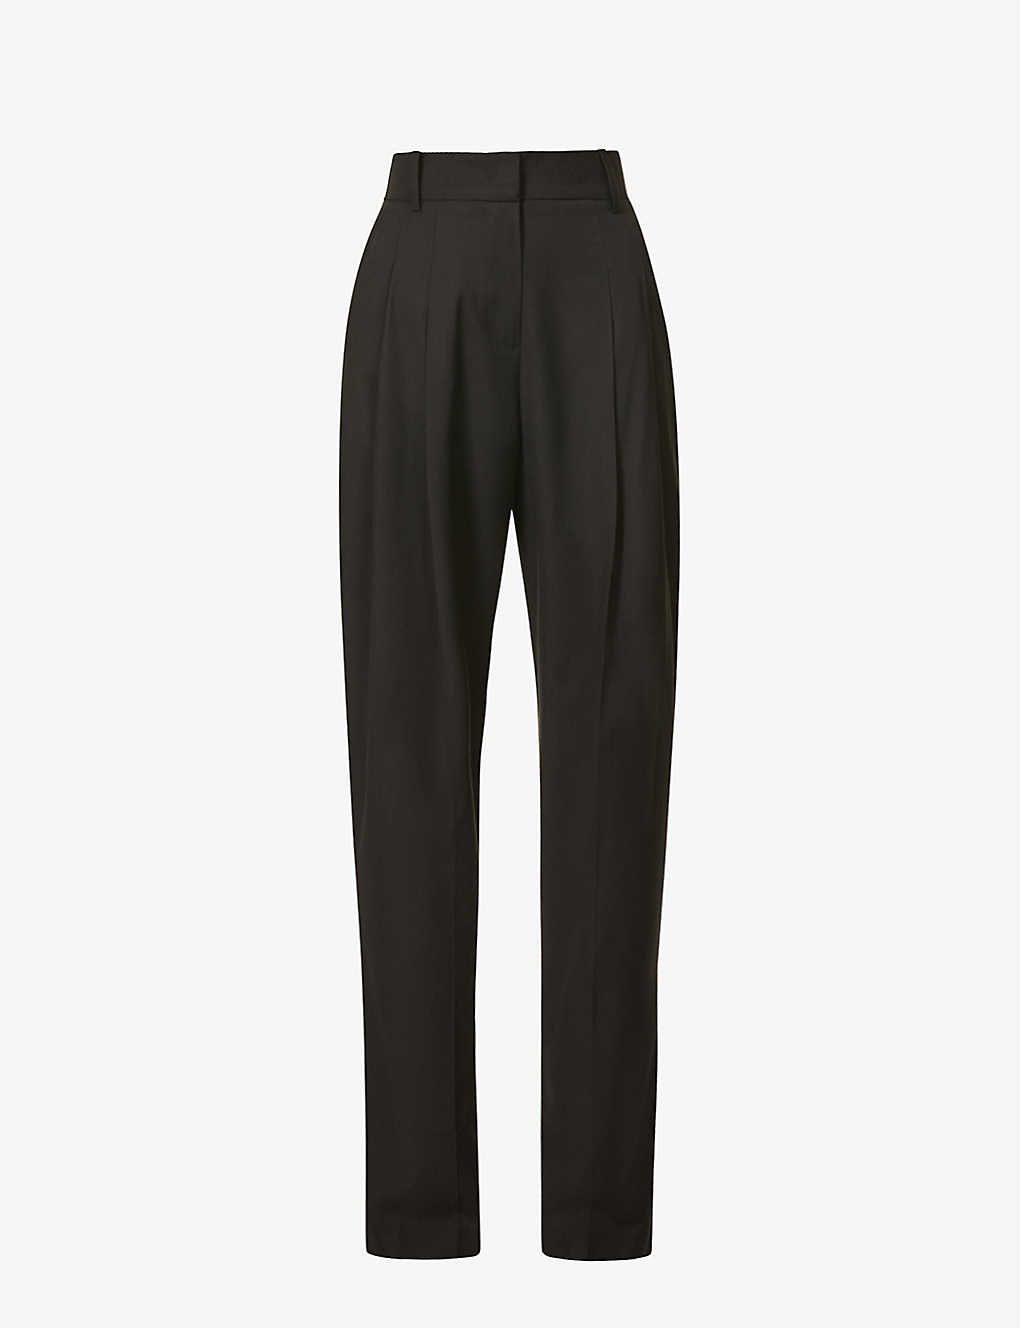 The Frankie Shop Gelso Pleated Tapered High-rise Woven Trousers In Black